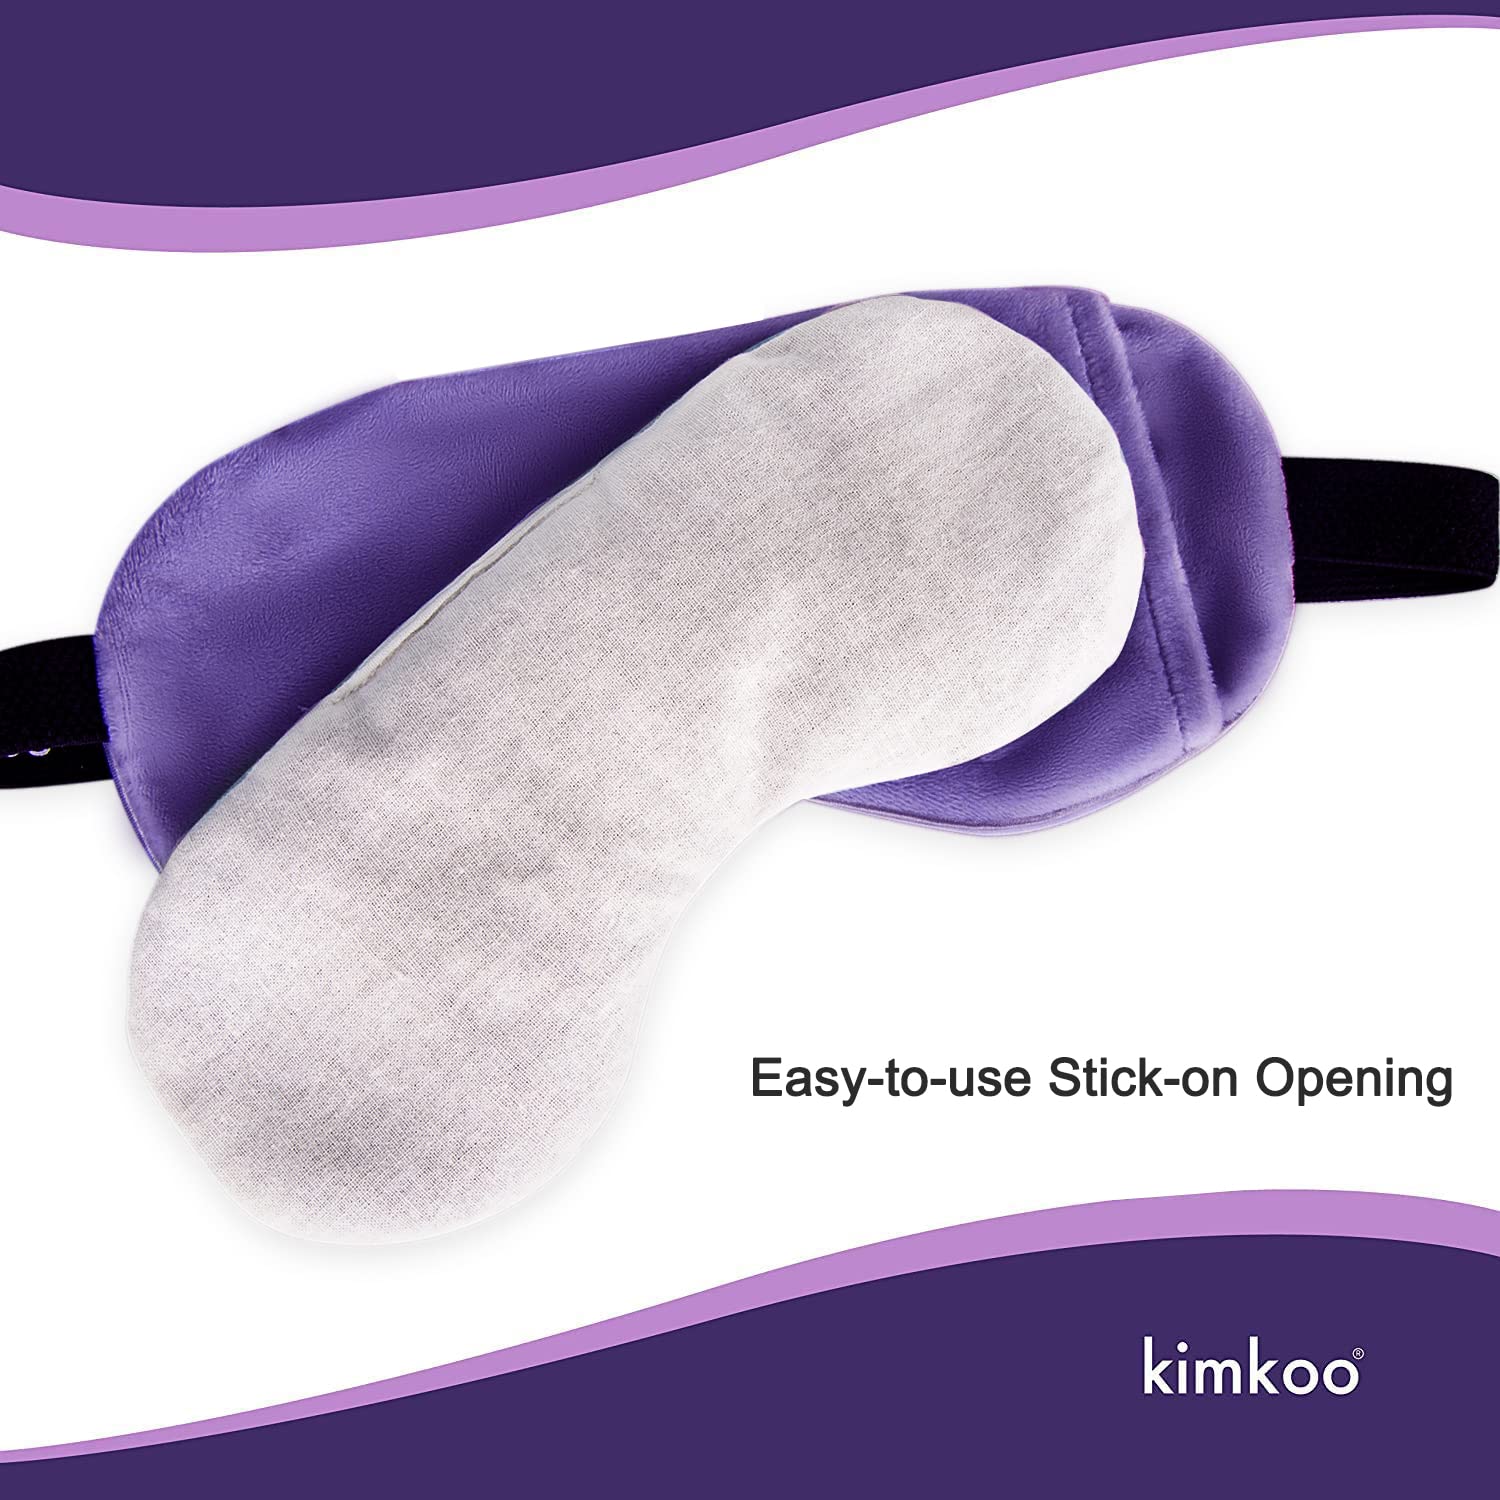 Kimkoo Moist Heat Eye Compress&Microwave Hot Eye Mask for Dry Eyes，Natural and Healthy Therapies